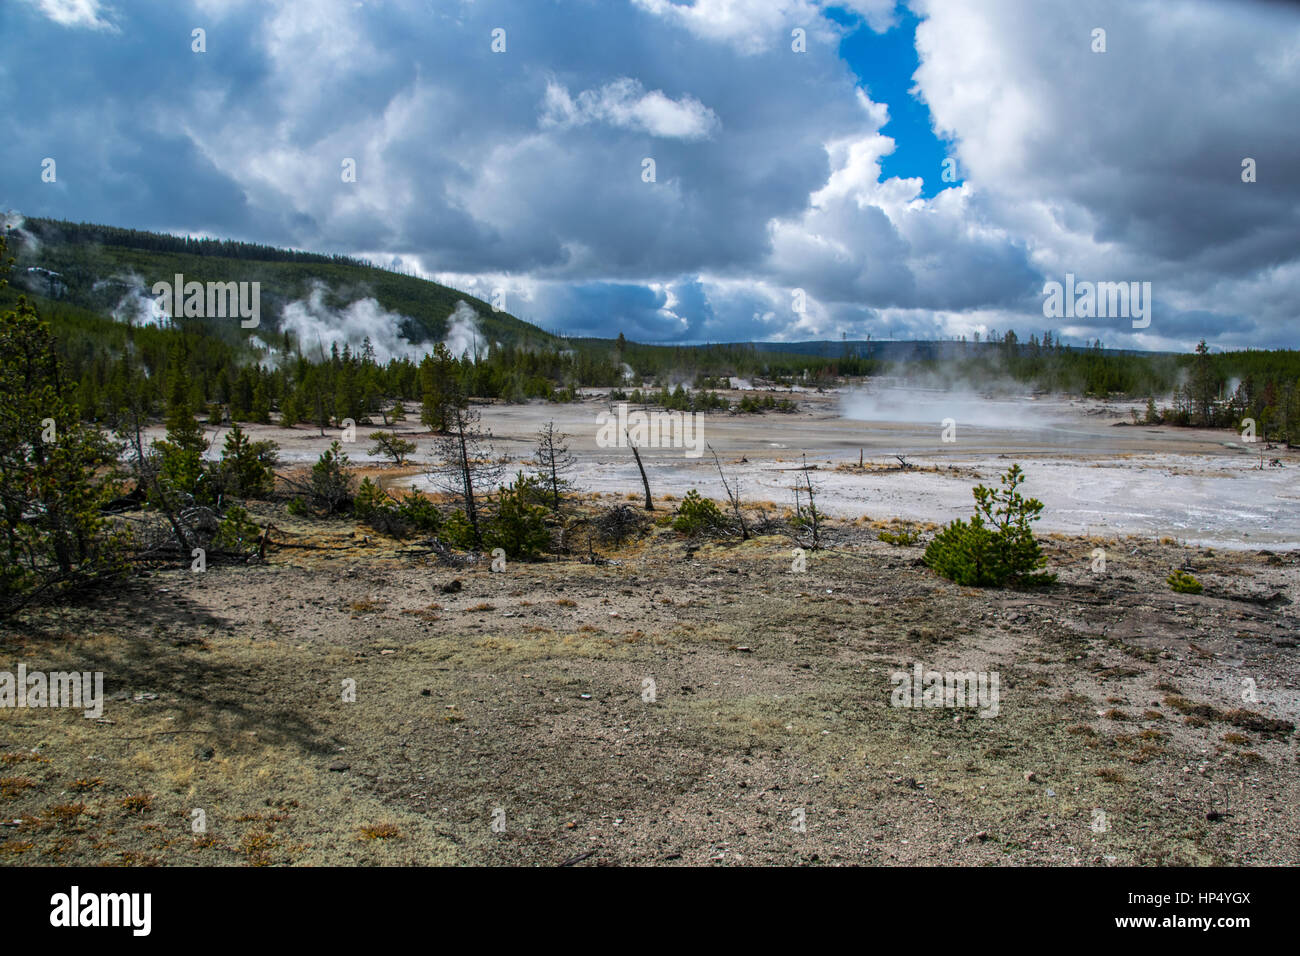 A Geothermal Valley in Yellowstone National Park Stock Photo